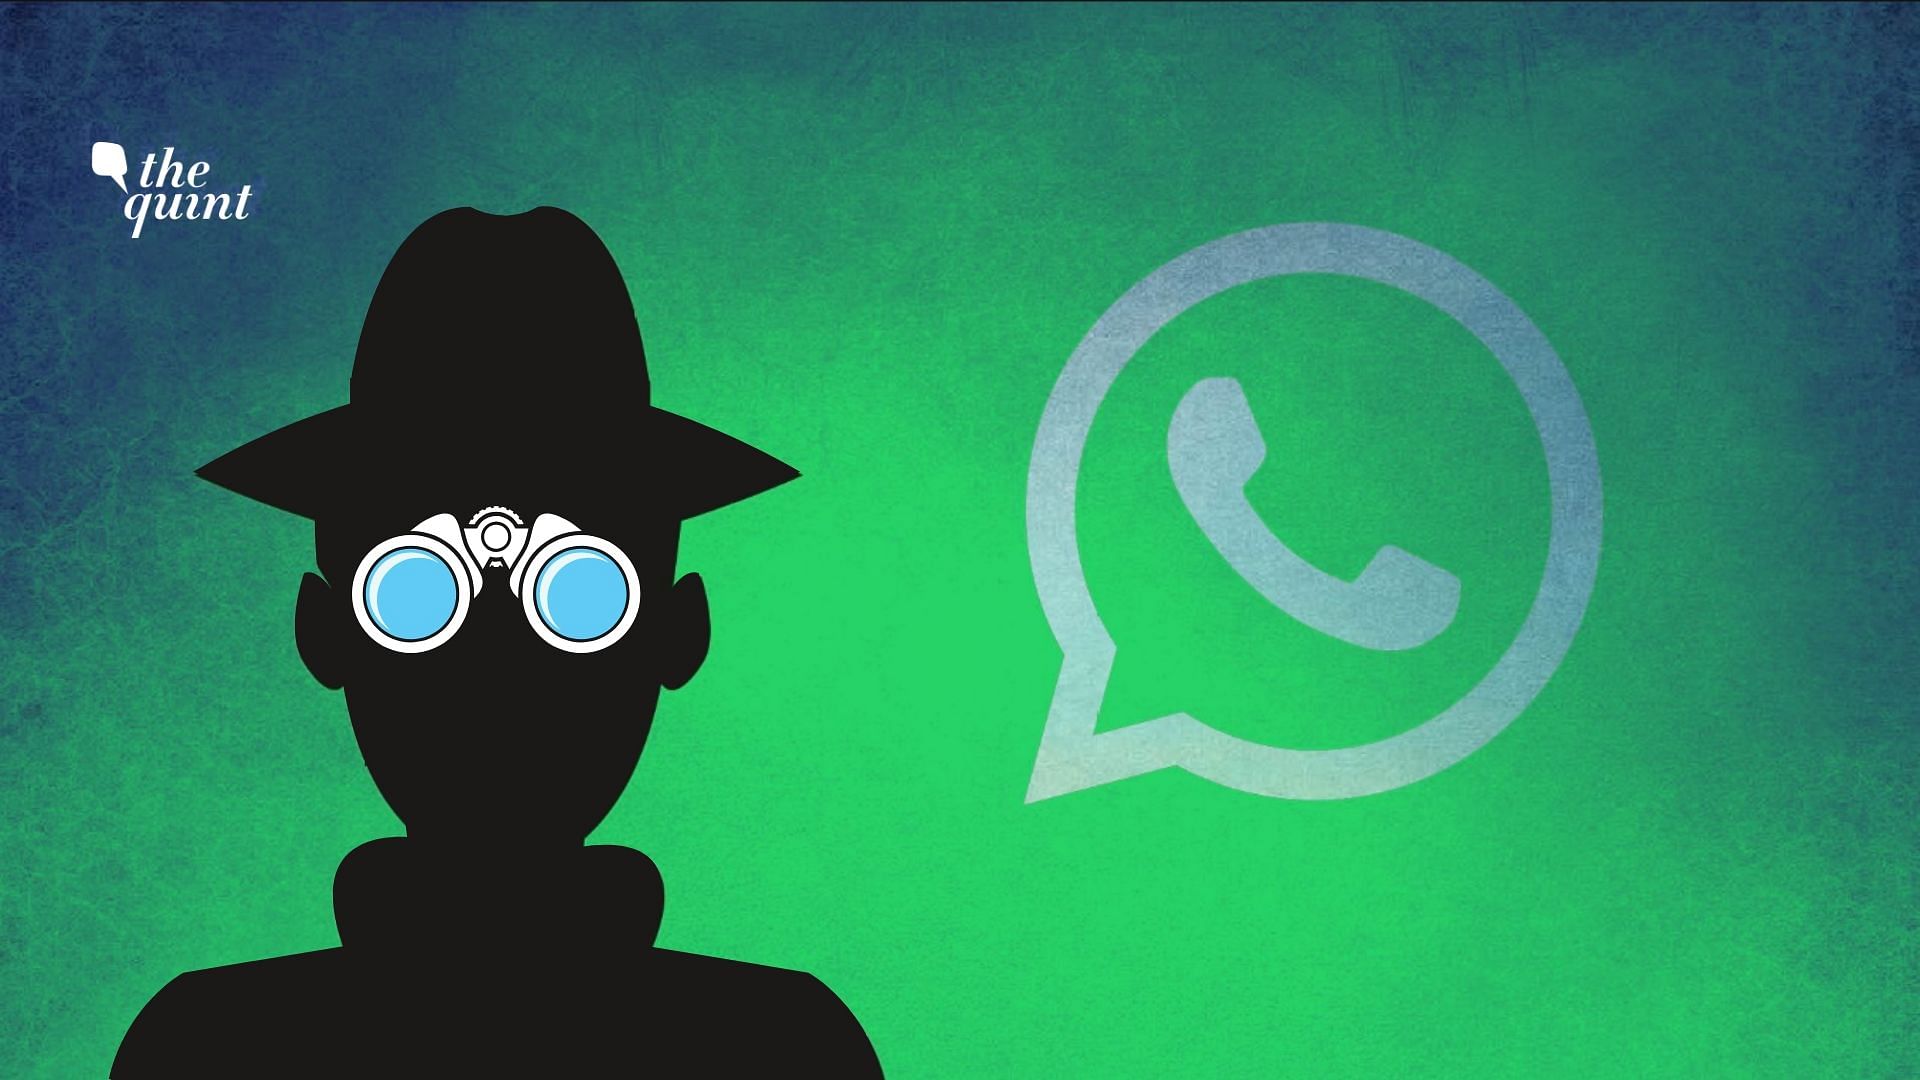  WhatsApp has now officially responded to the Ministry of Electronics and IT on the security incident related to the breach by Pegasus malware. 